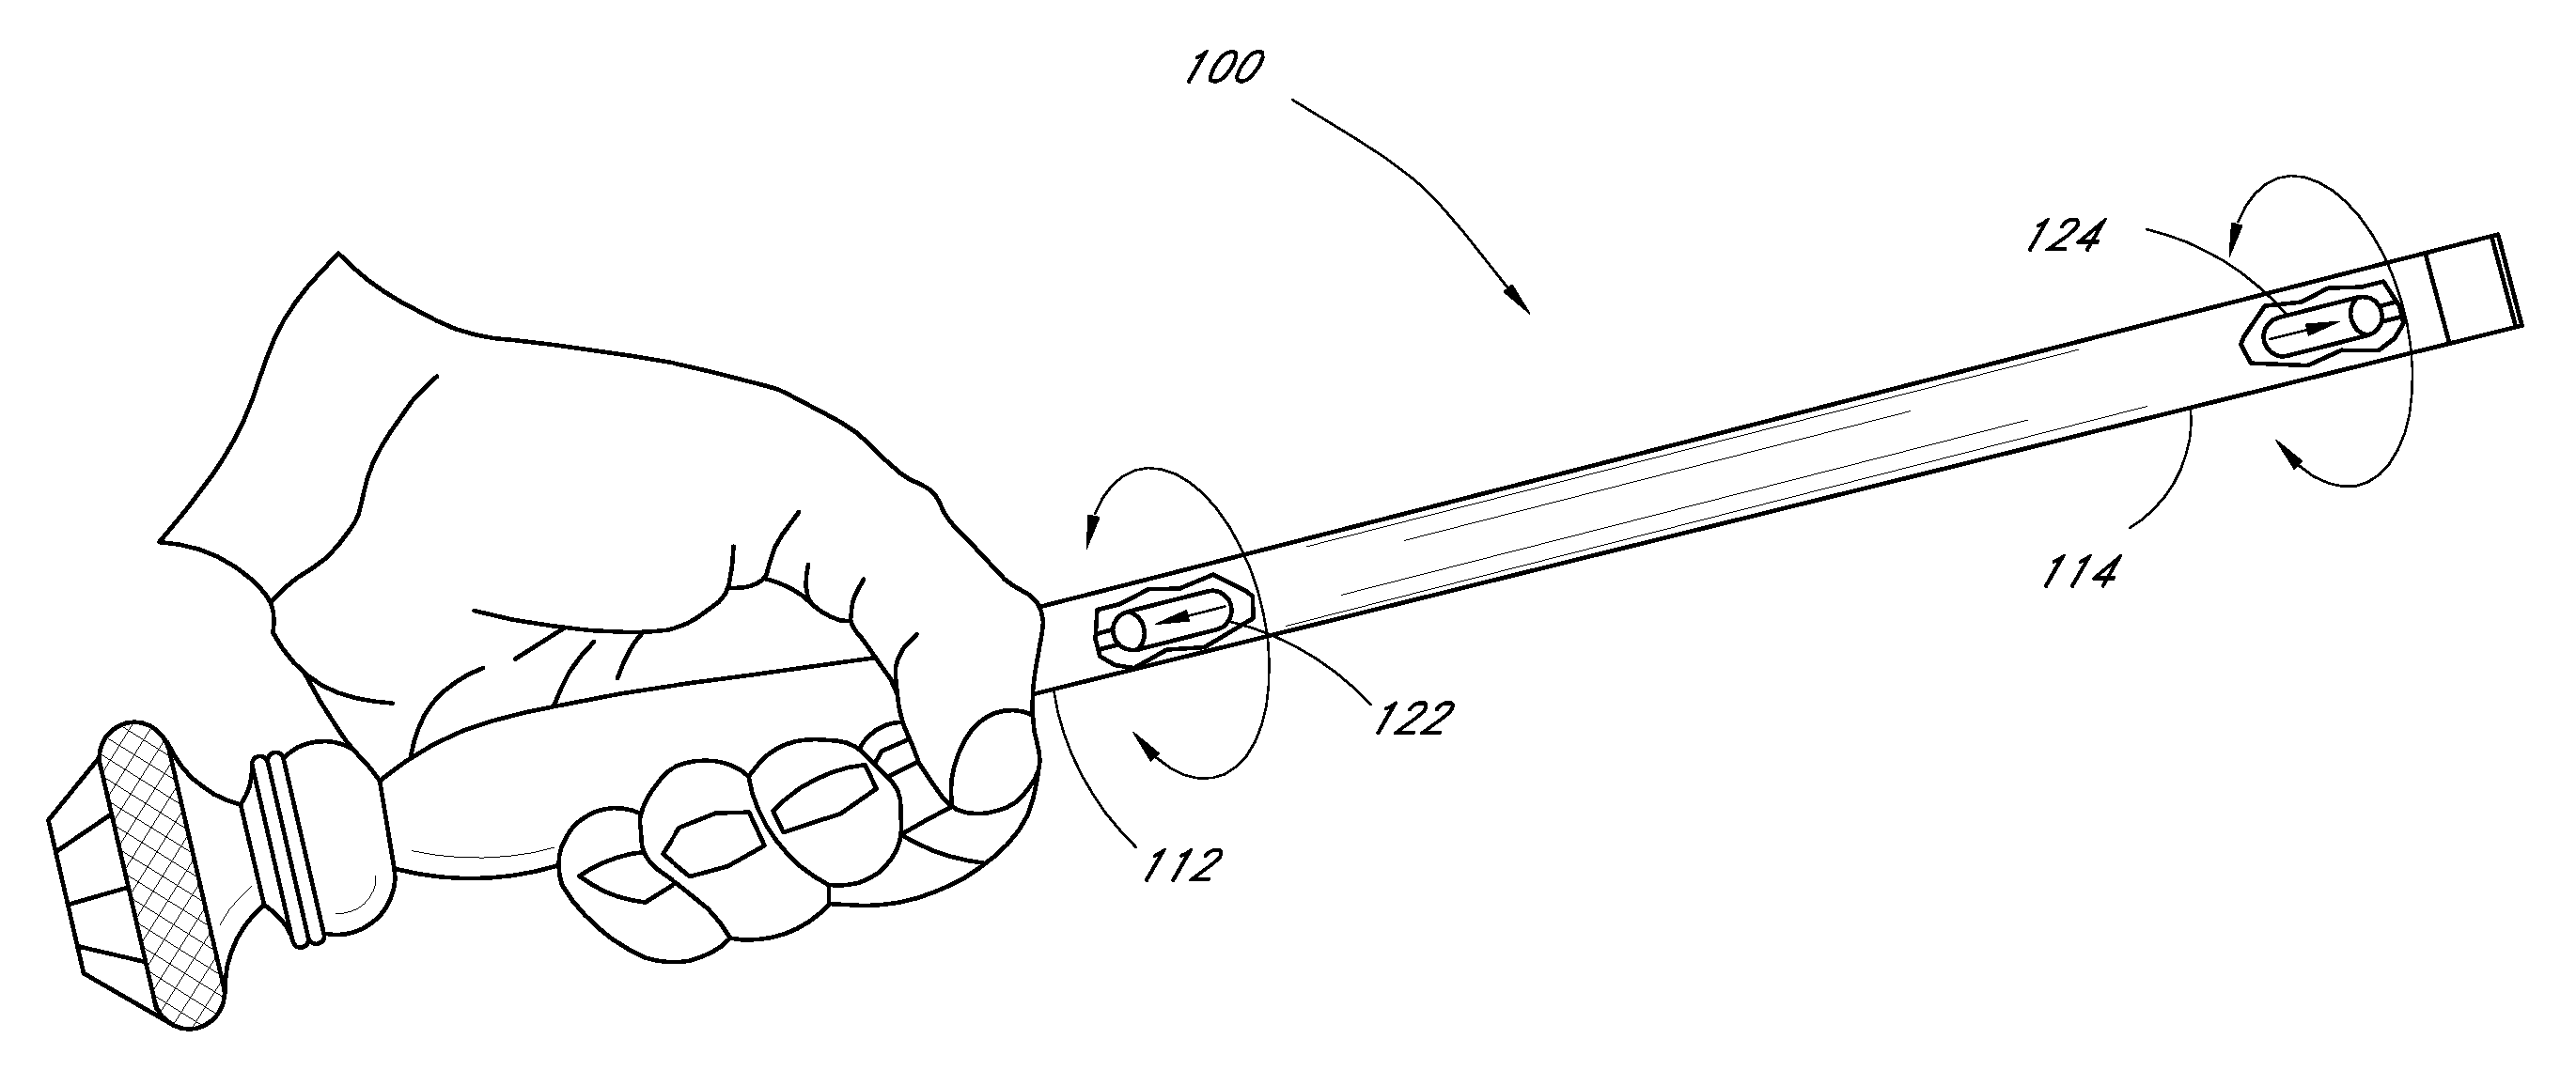 Apparatus and methods for providing interactive entertainment